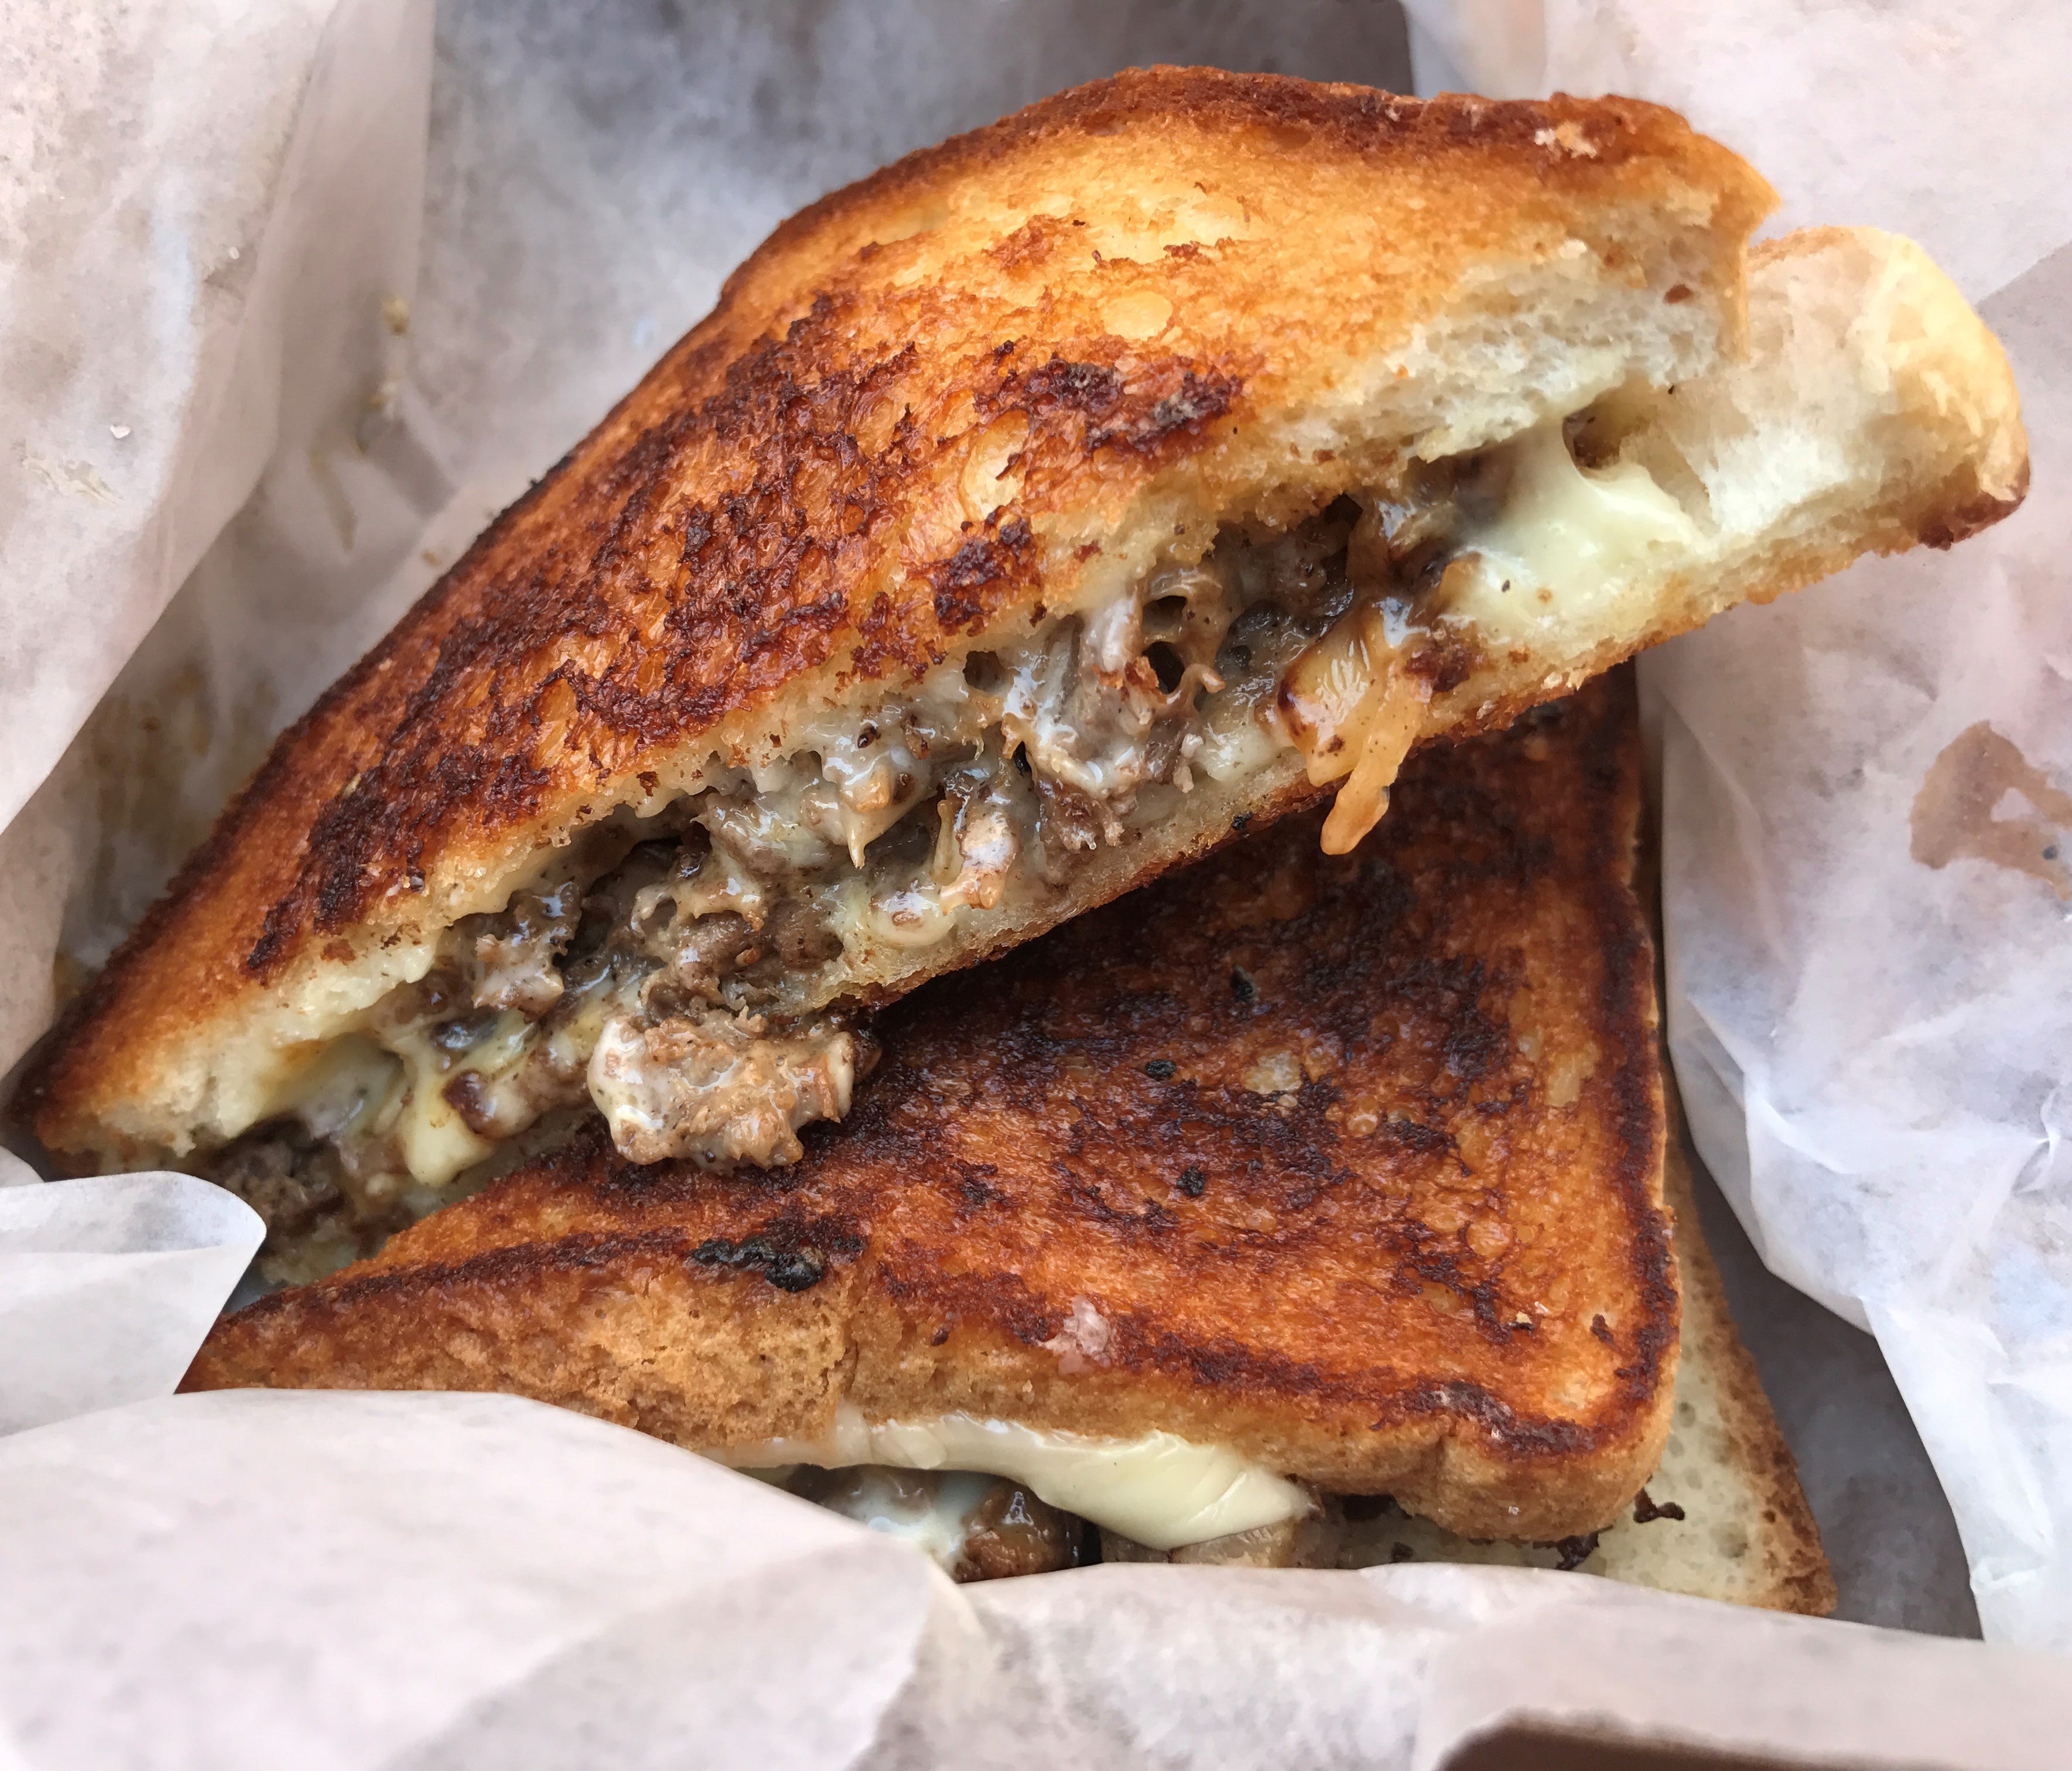 A combination cheesesteak and grilled cheese sandwich, the Grilled Cheesey Steak is one of the best things on the menu.